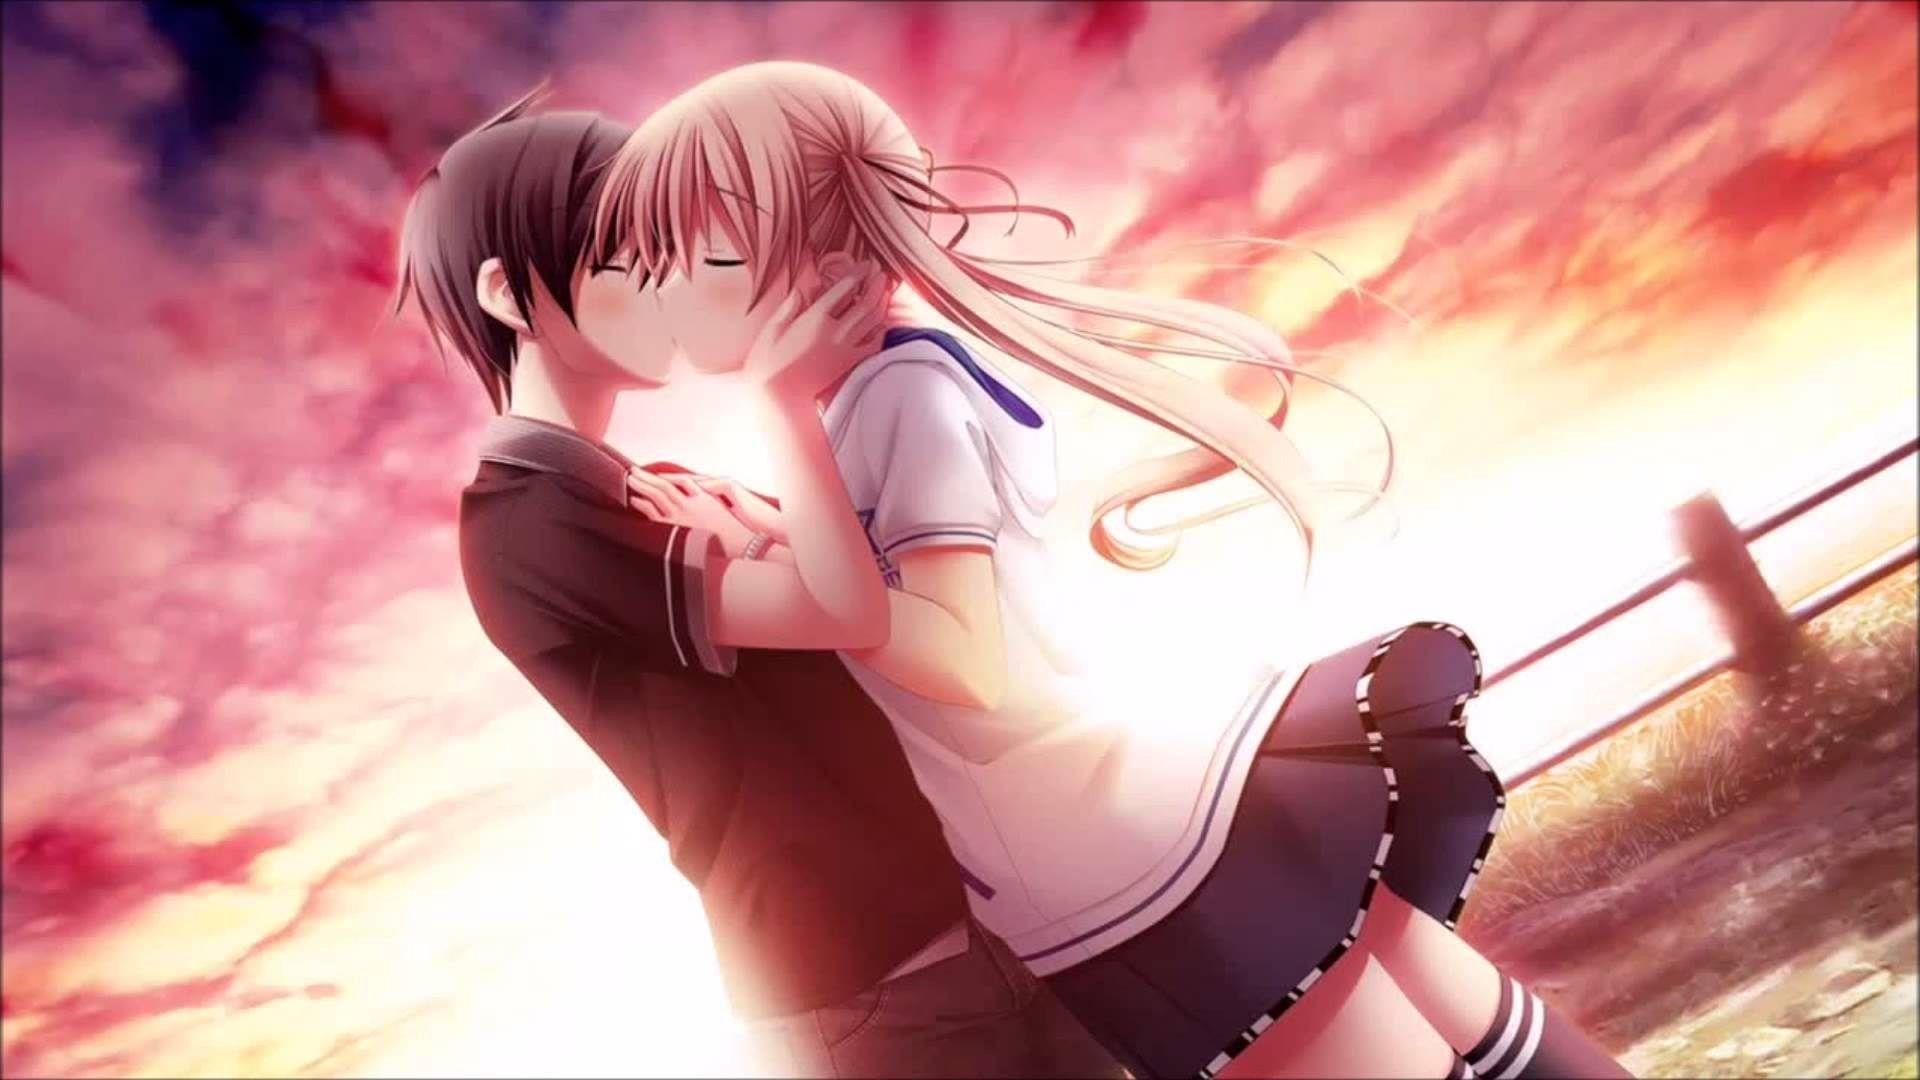 Couple Anime Kiss HD Wallpapers - Wallpaper Cave